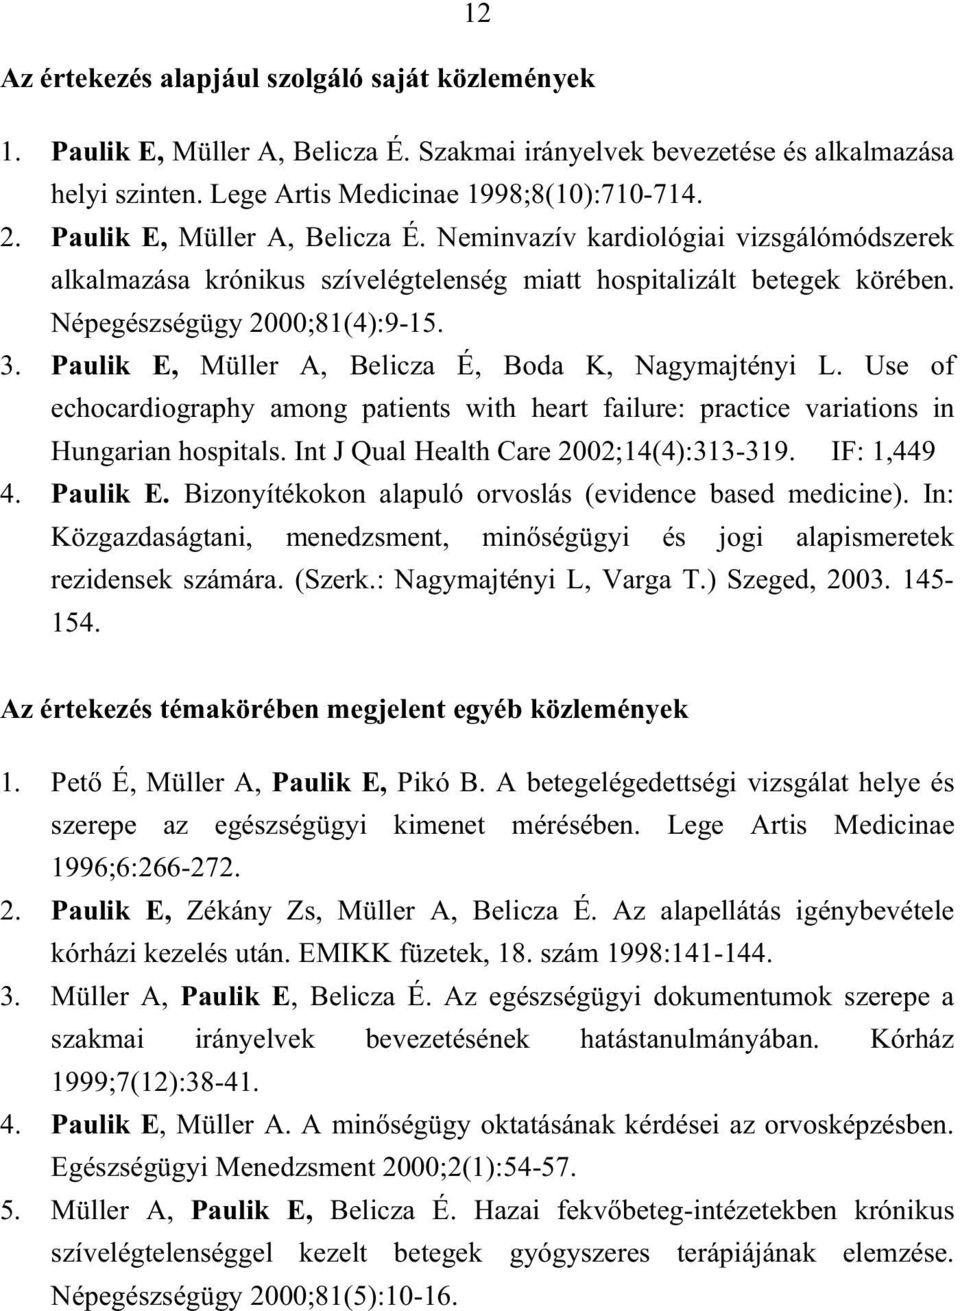 Paulik E, Müller A, Belicza É, Boda K, Nagymajtényi L. Use of echocardiography among patients with heart failure: practice variations in Hungarian hospitals. Int J Qual Health Care 2002;14(4):313-319.